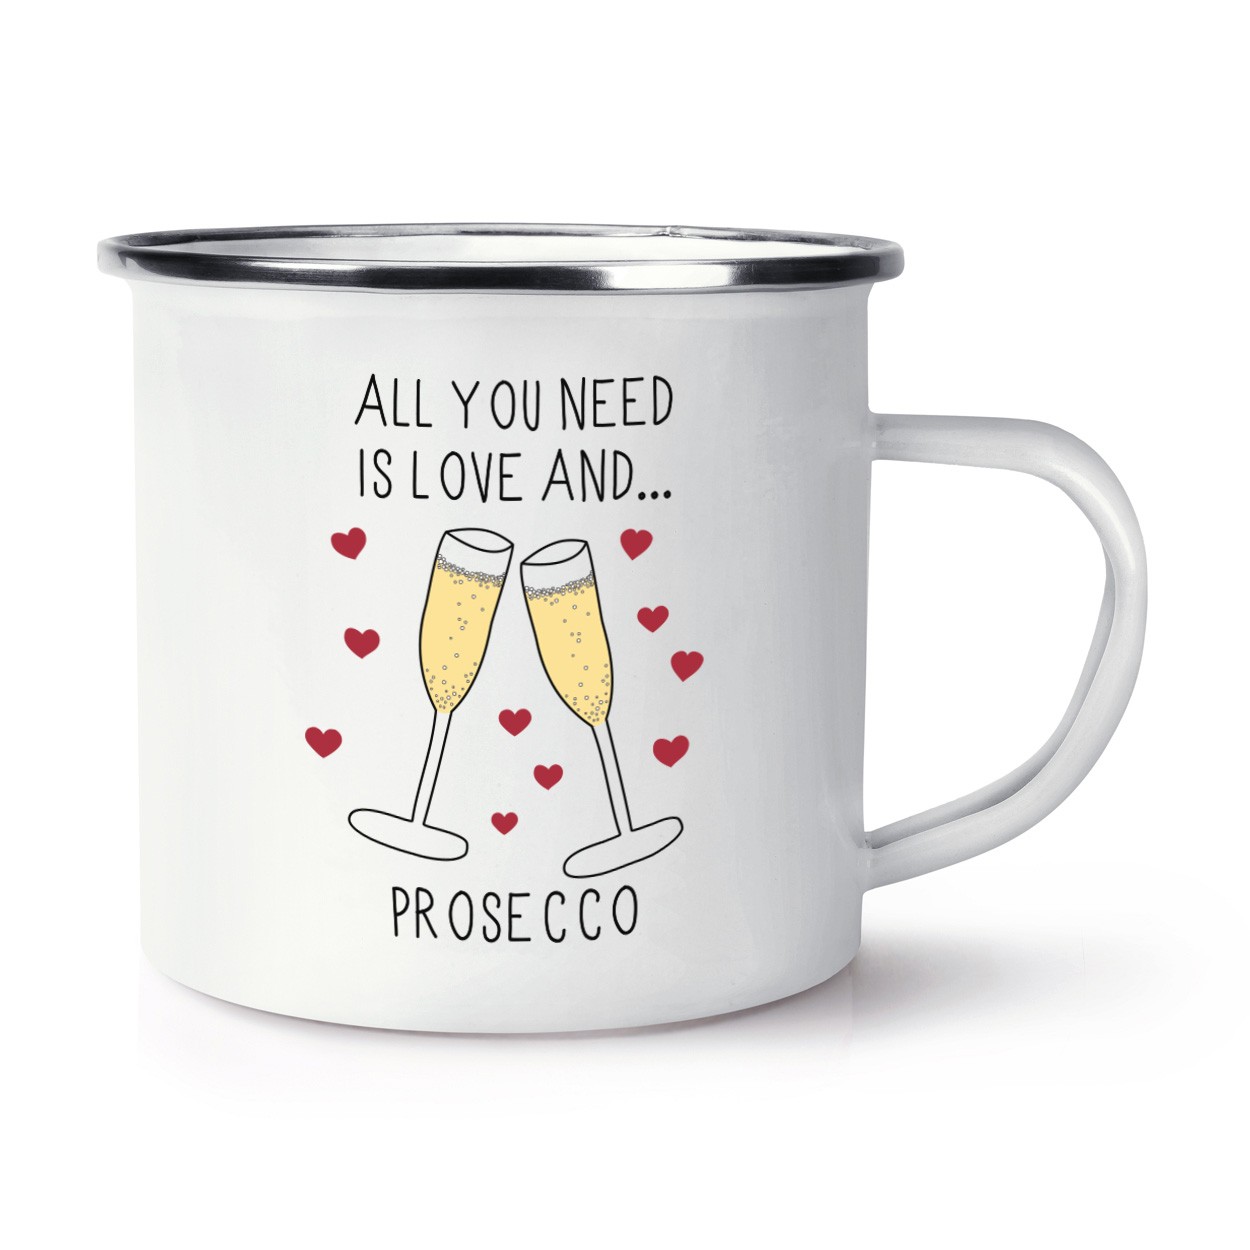 All You Need Is Love And Prosecco Retro Enamel Mug Cup